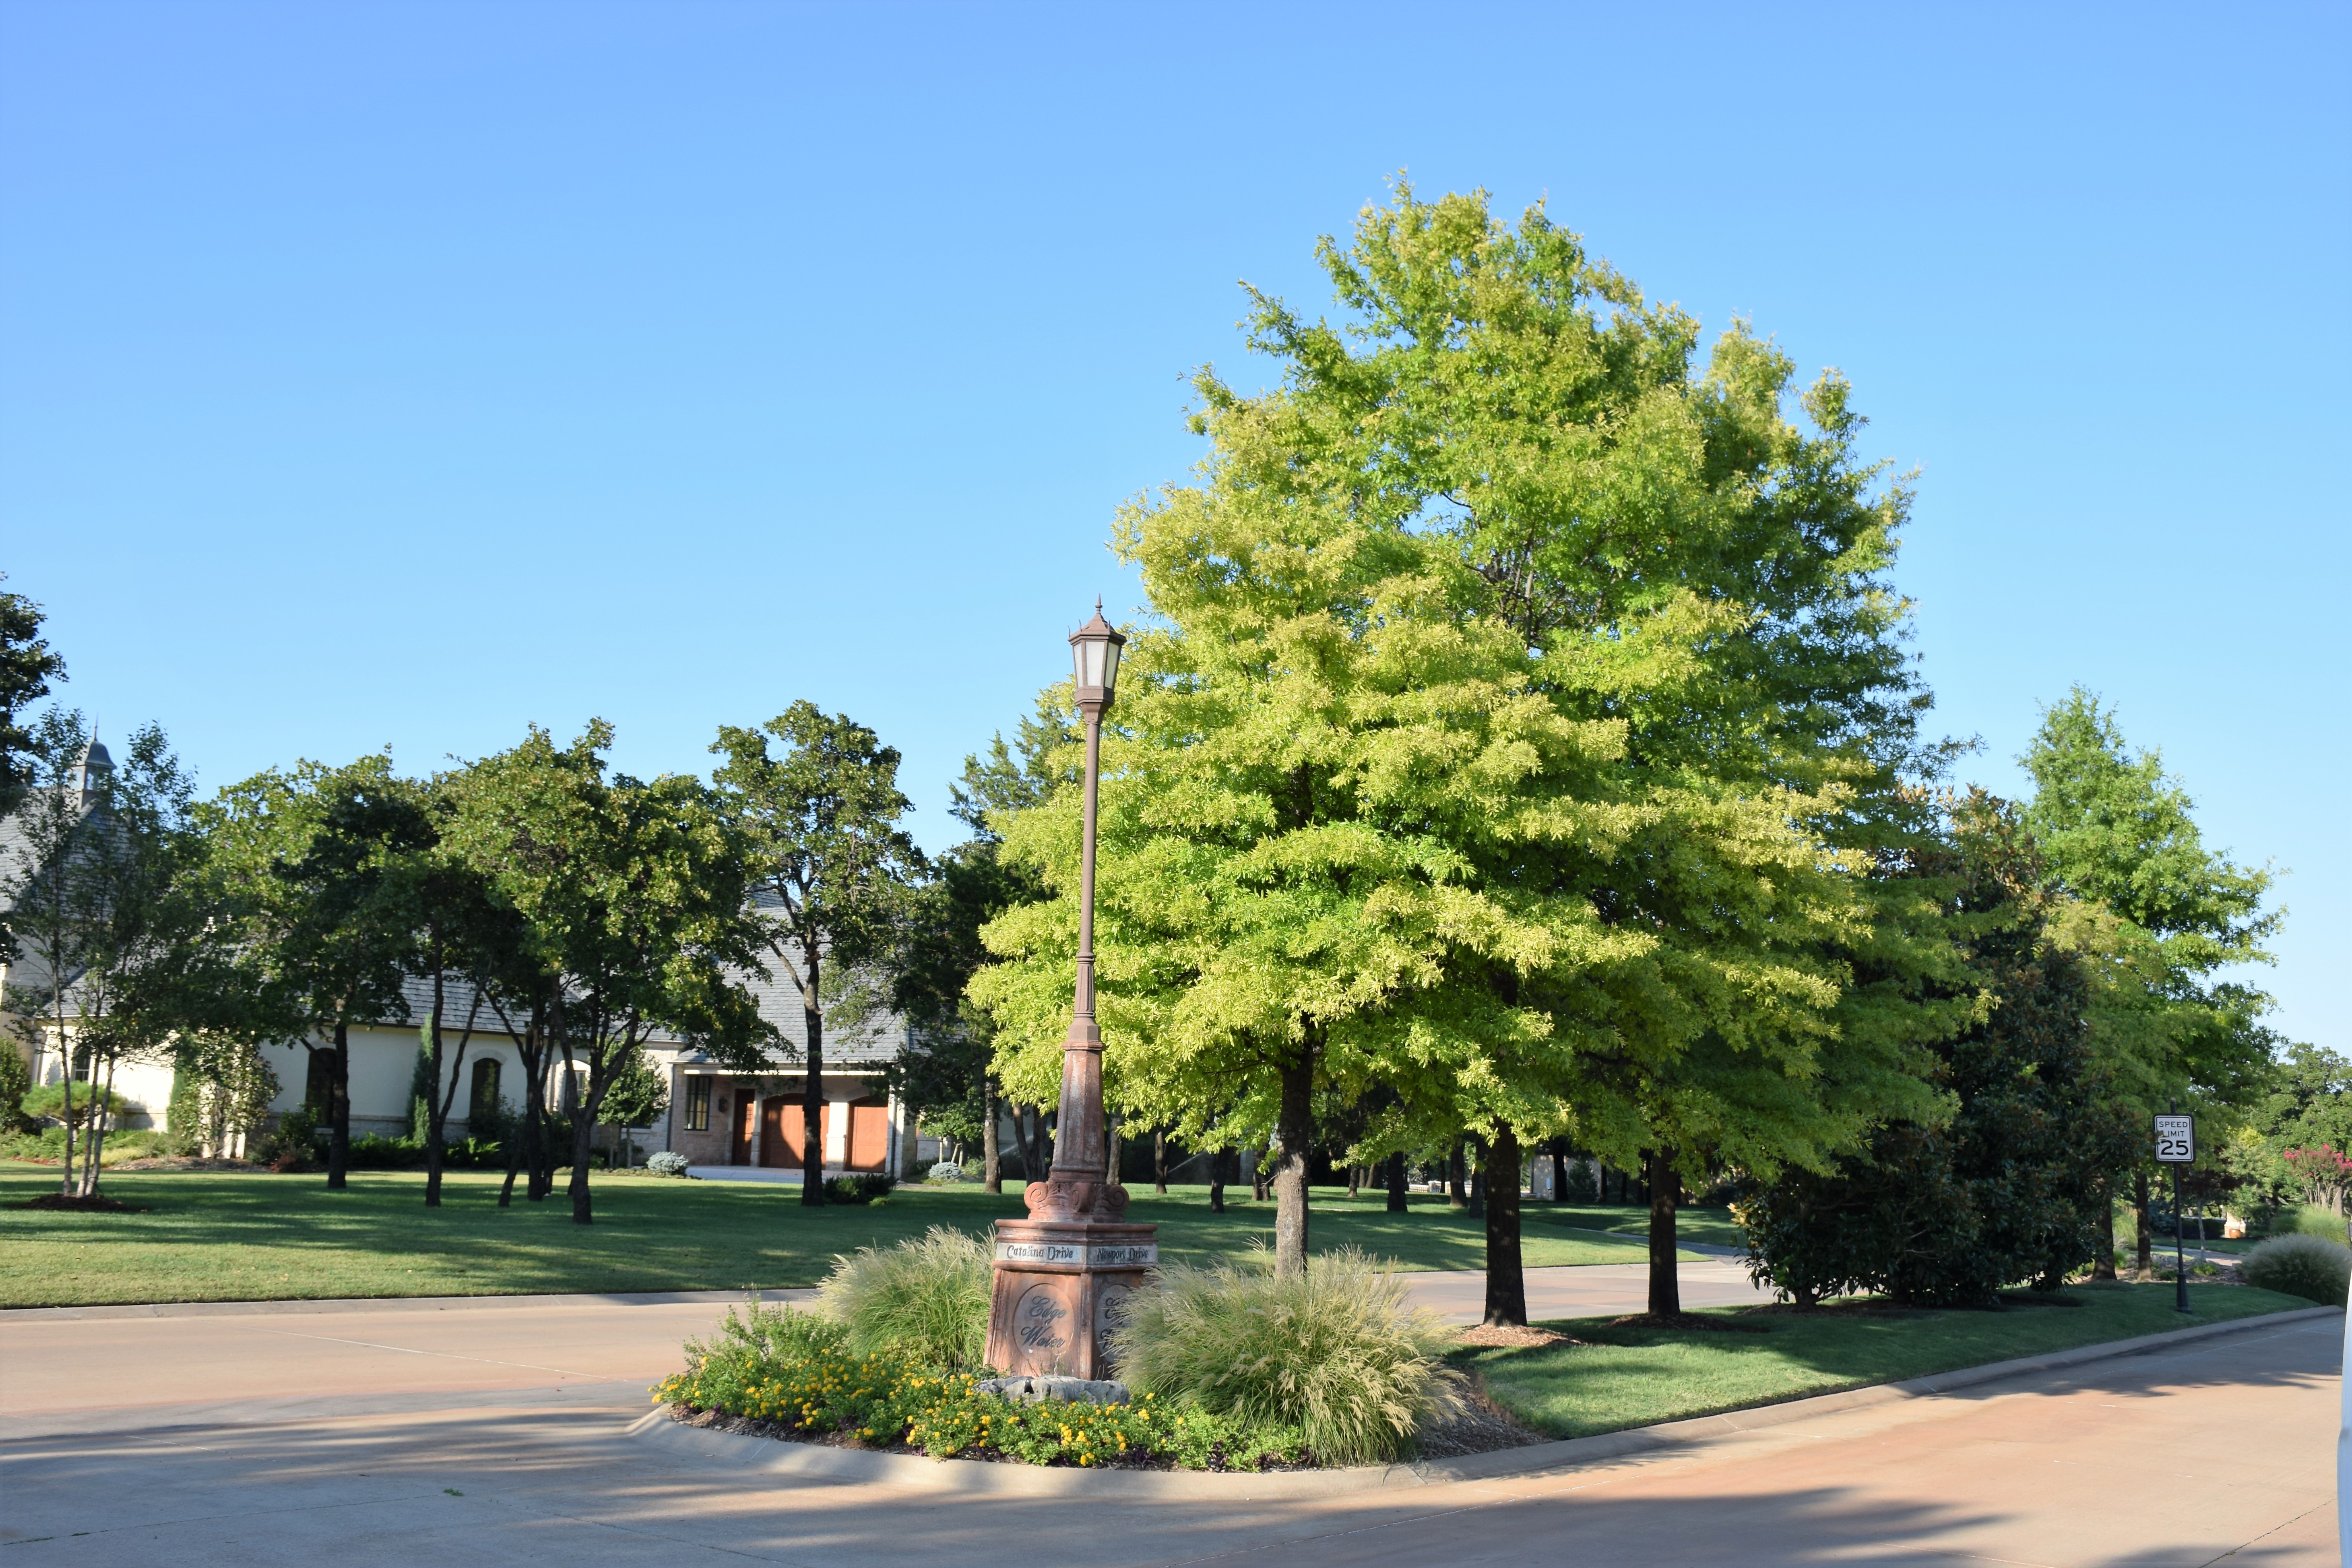 Tree & lawn care services from e-greenleaf is top ranked in OKC by all of their customers.